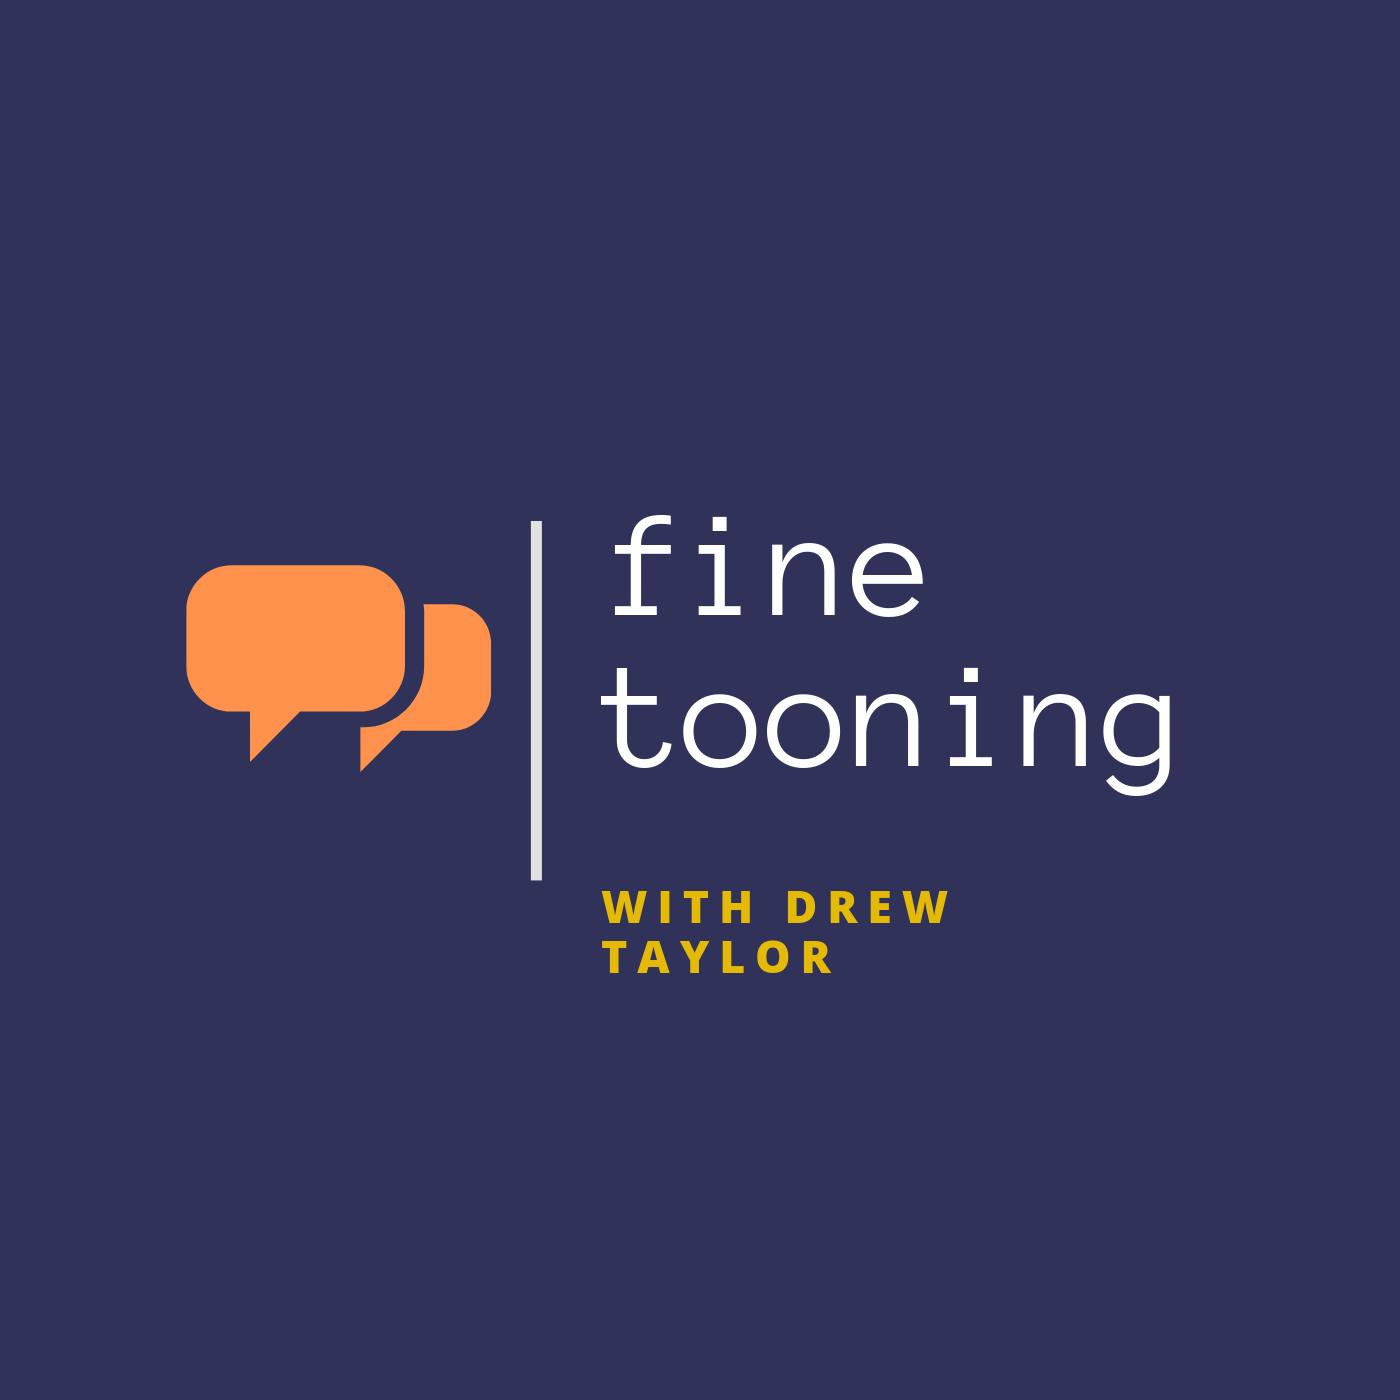 Fine Tooning with Drew Taylor - Episode 123:  Why Disney’s “Gremlins” movie never got off the ground